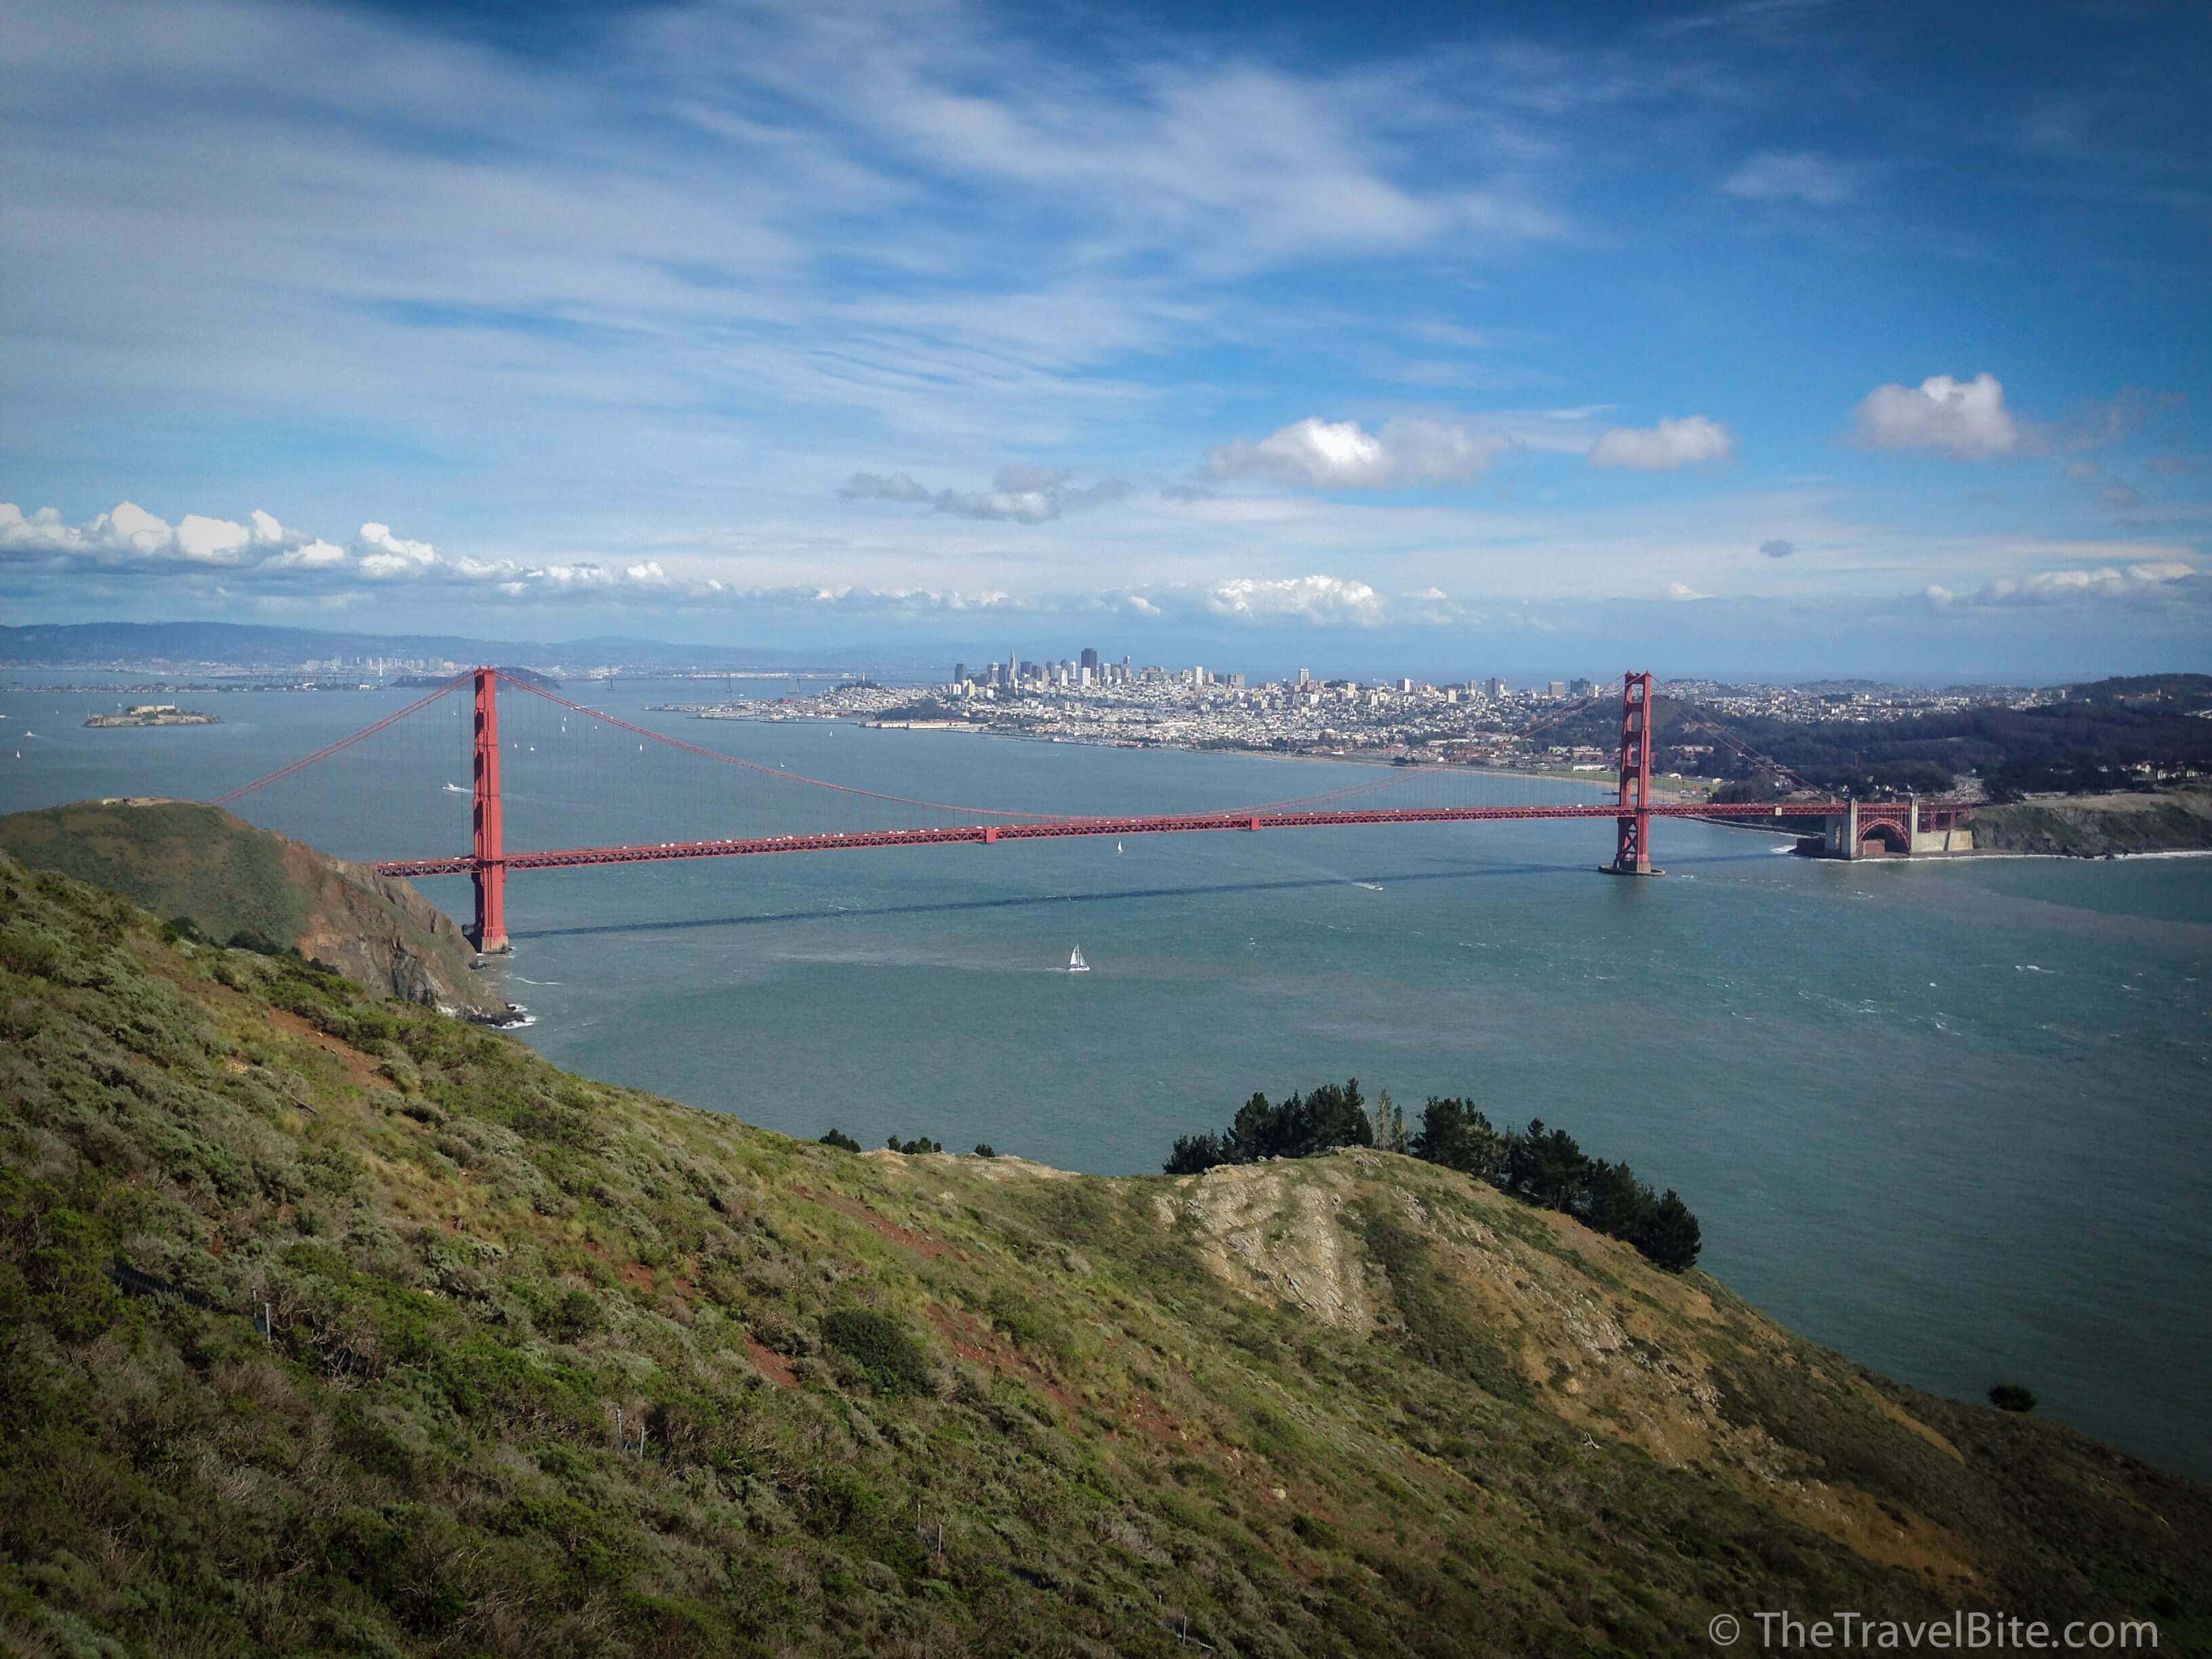 7 Things To Do In San Francisco - The Travel Bite3264 x 2448